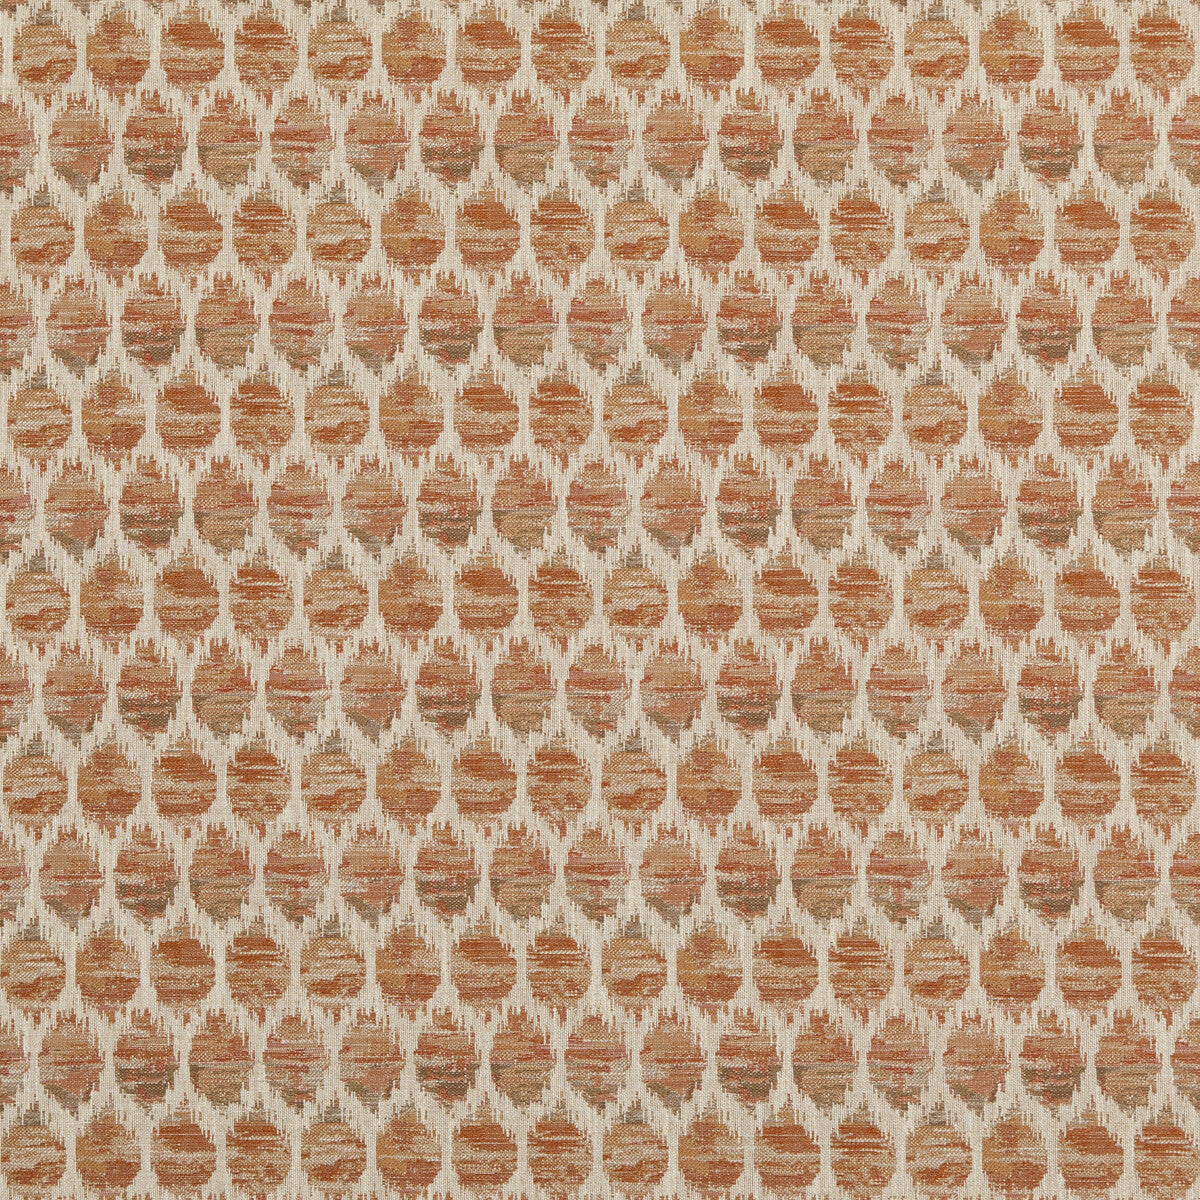 Honeycomb fabric in spice color - pattern PF50491.330.0 - by Baker Lifestyle in the Block Weaves collection